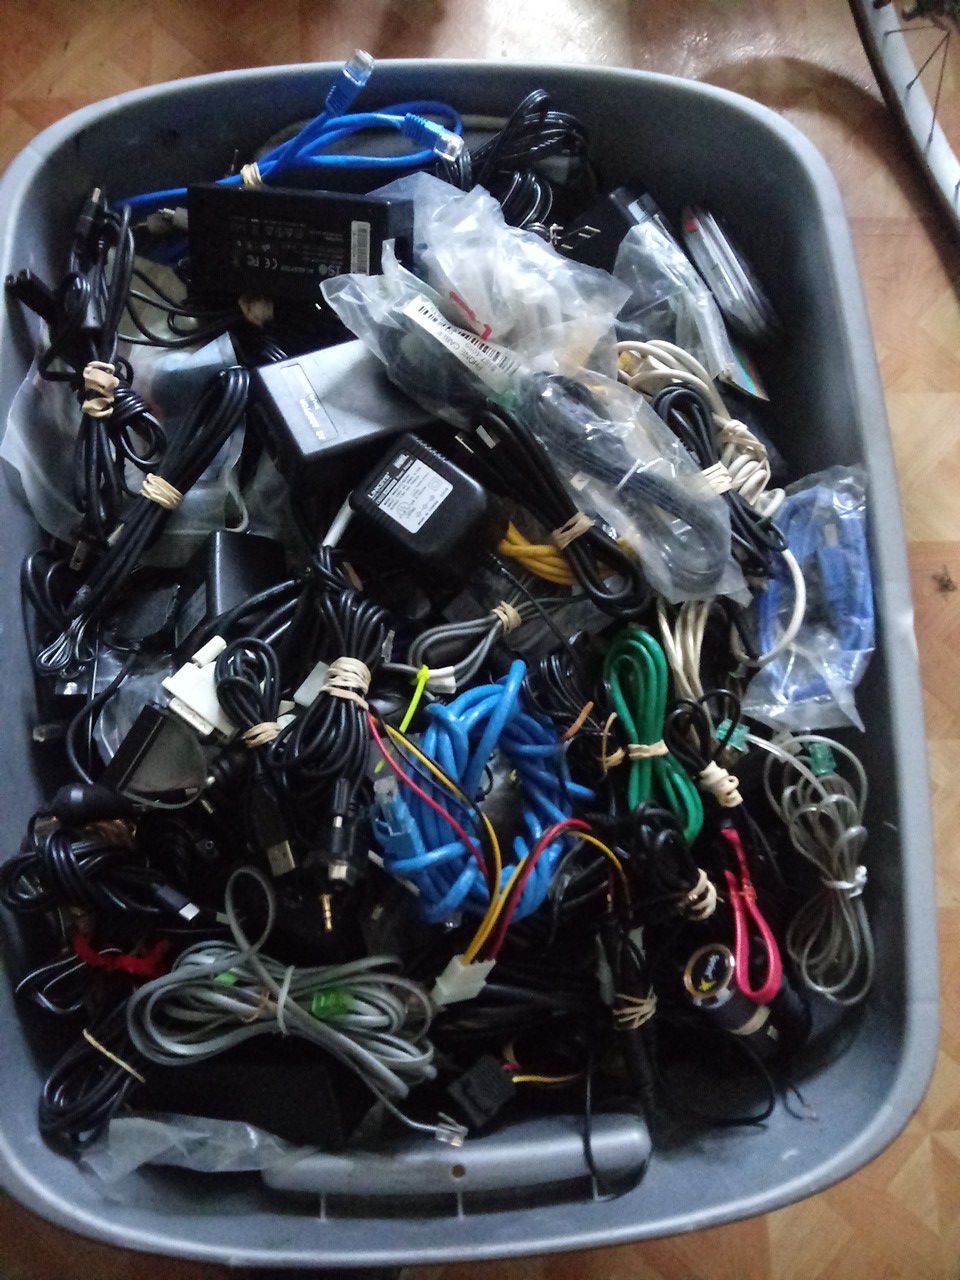 Lot of computer related cords